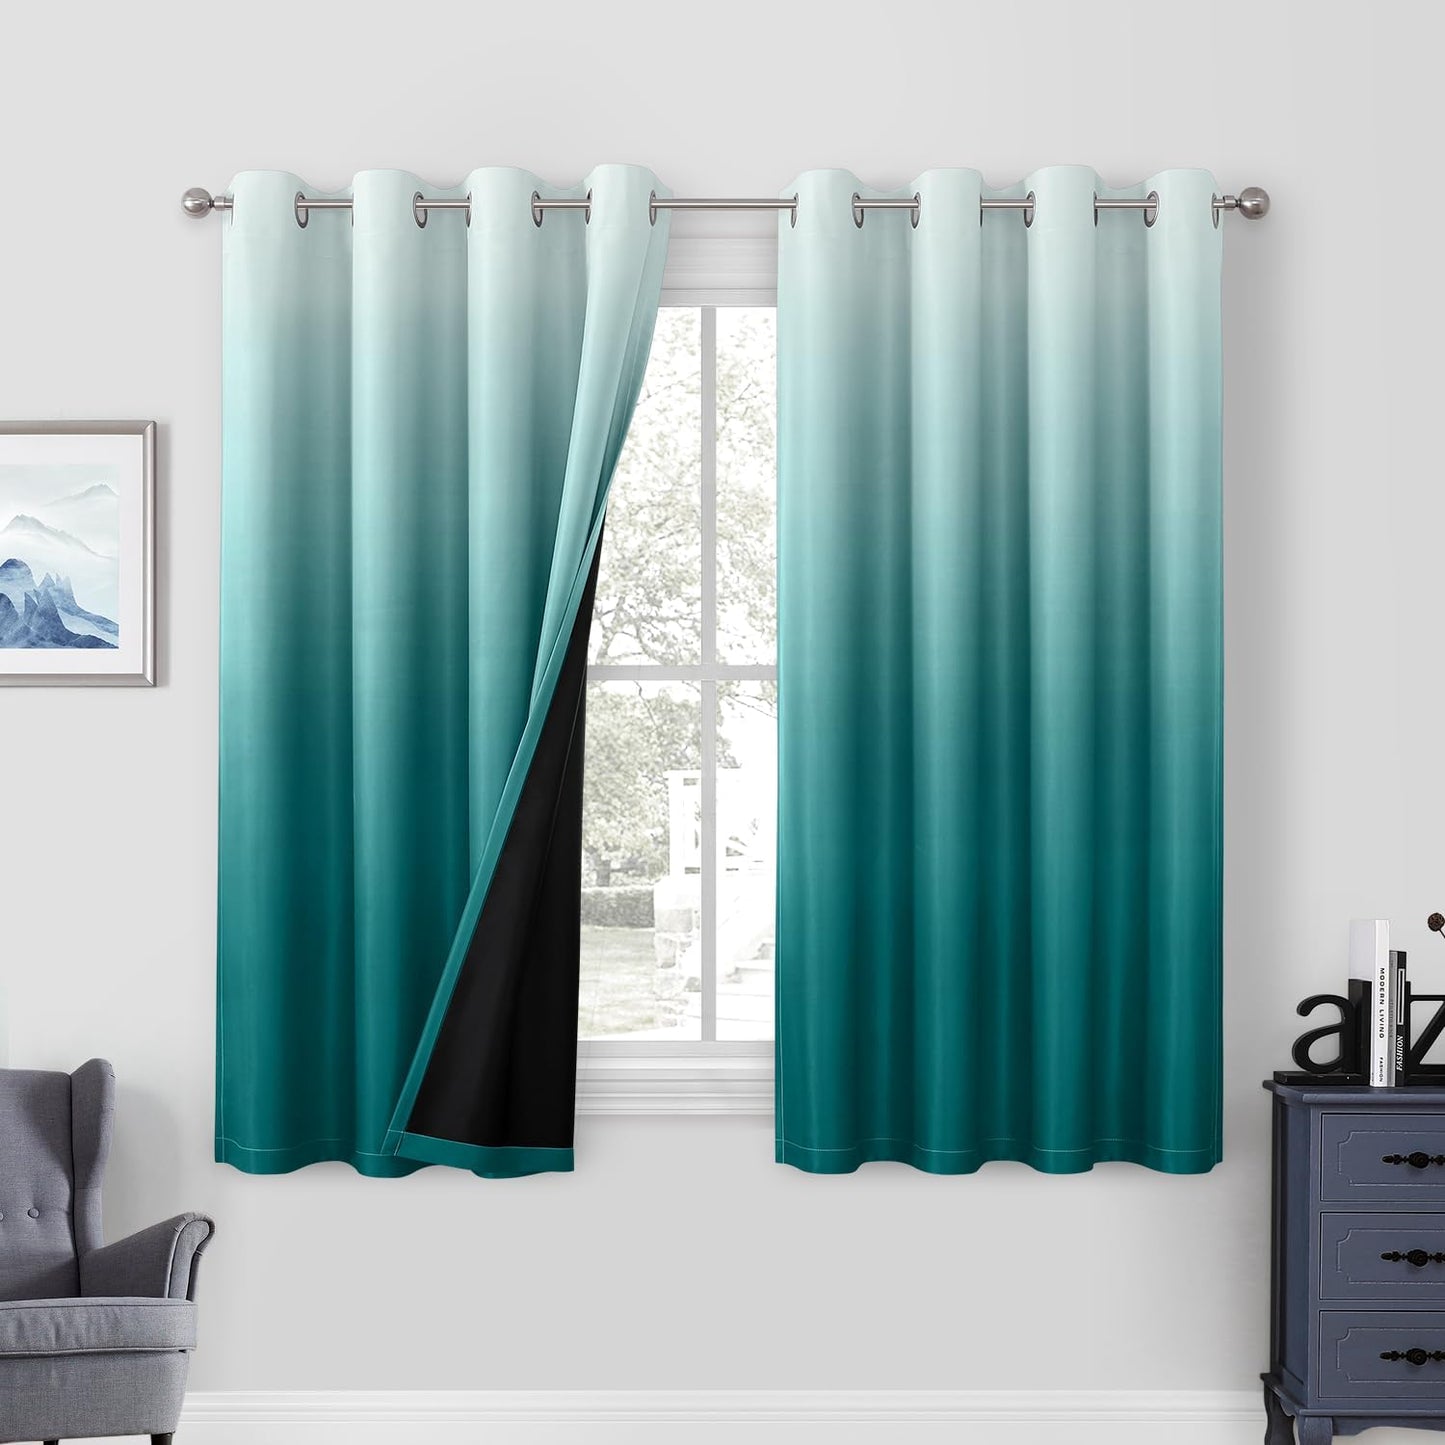 HOMEIDEAS 100% Black Ombre Blackout Curtains for Bedroom, Room Darkening Curtains 52 X 84 Inches Long Grommet Gradient Drapes, Light Blocking Thermal Insulated Curtains for Living Room, 2 Panels  HOMEIDEAS Teal 2 Panel-52" X 63" 